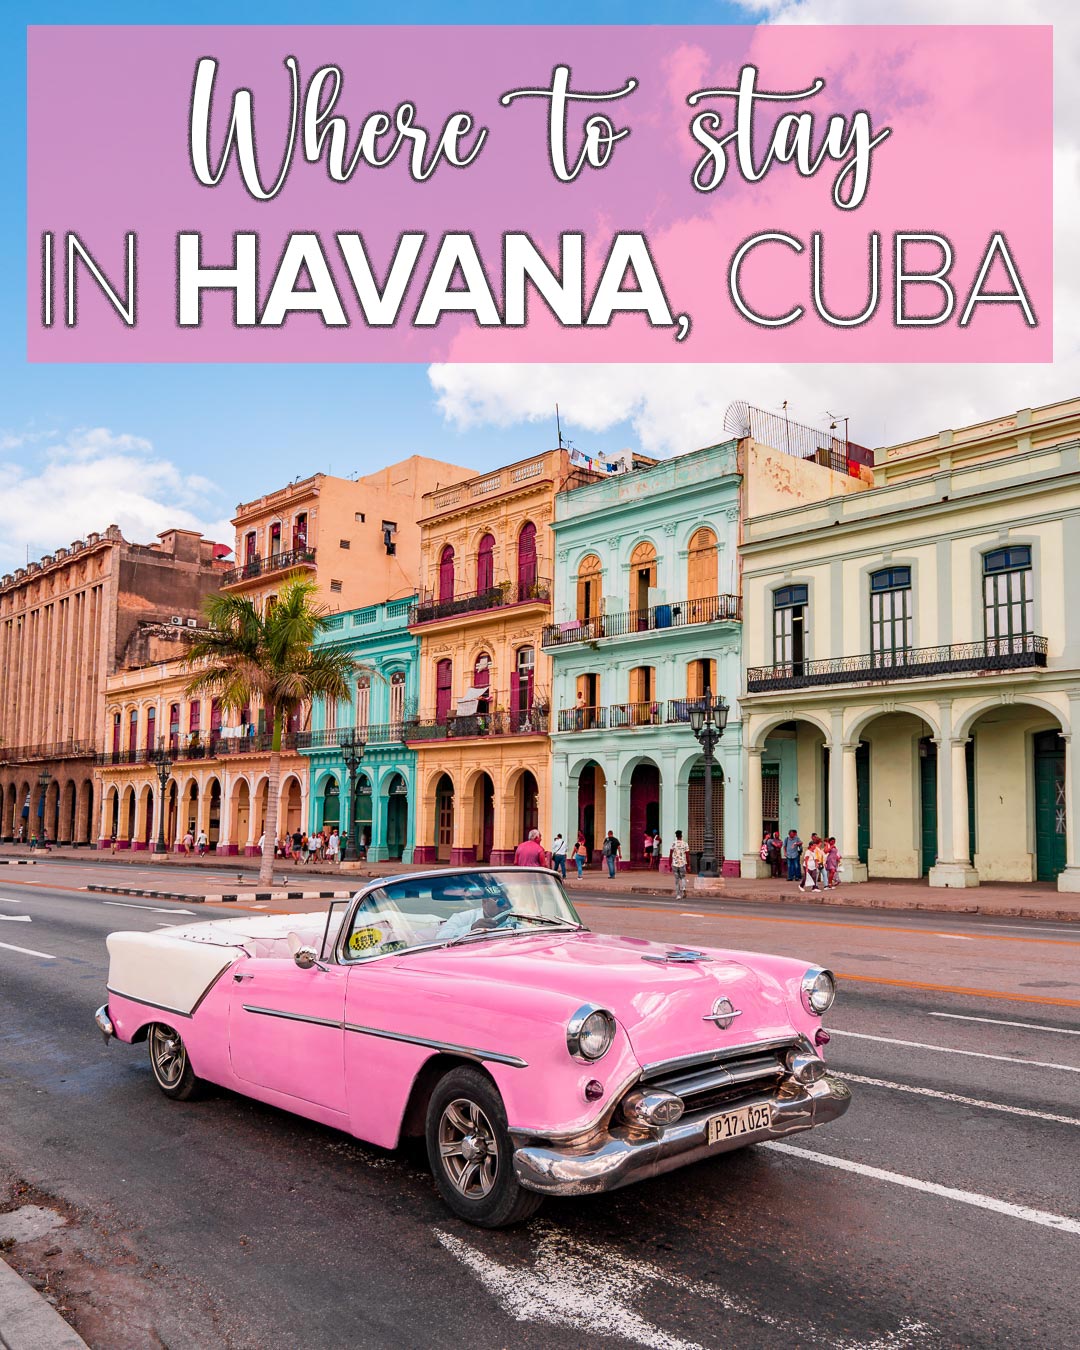 List 92+ Images where to stay in havana cuba 2016 Superb